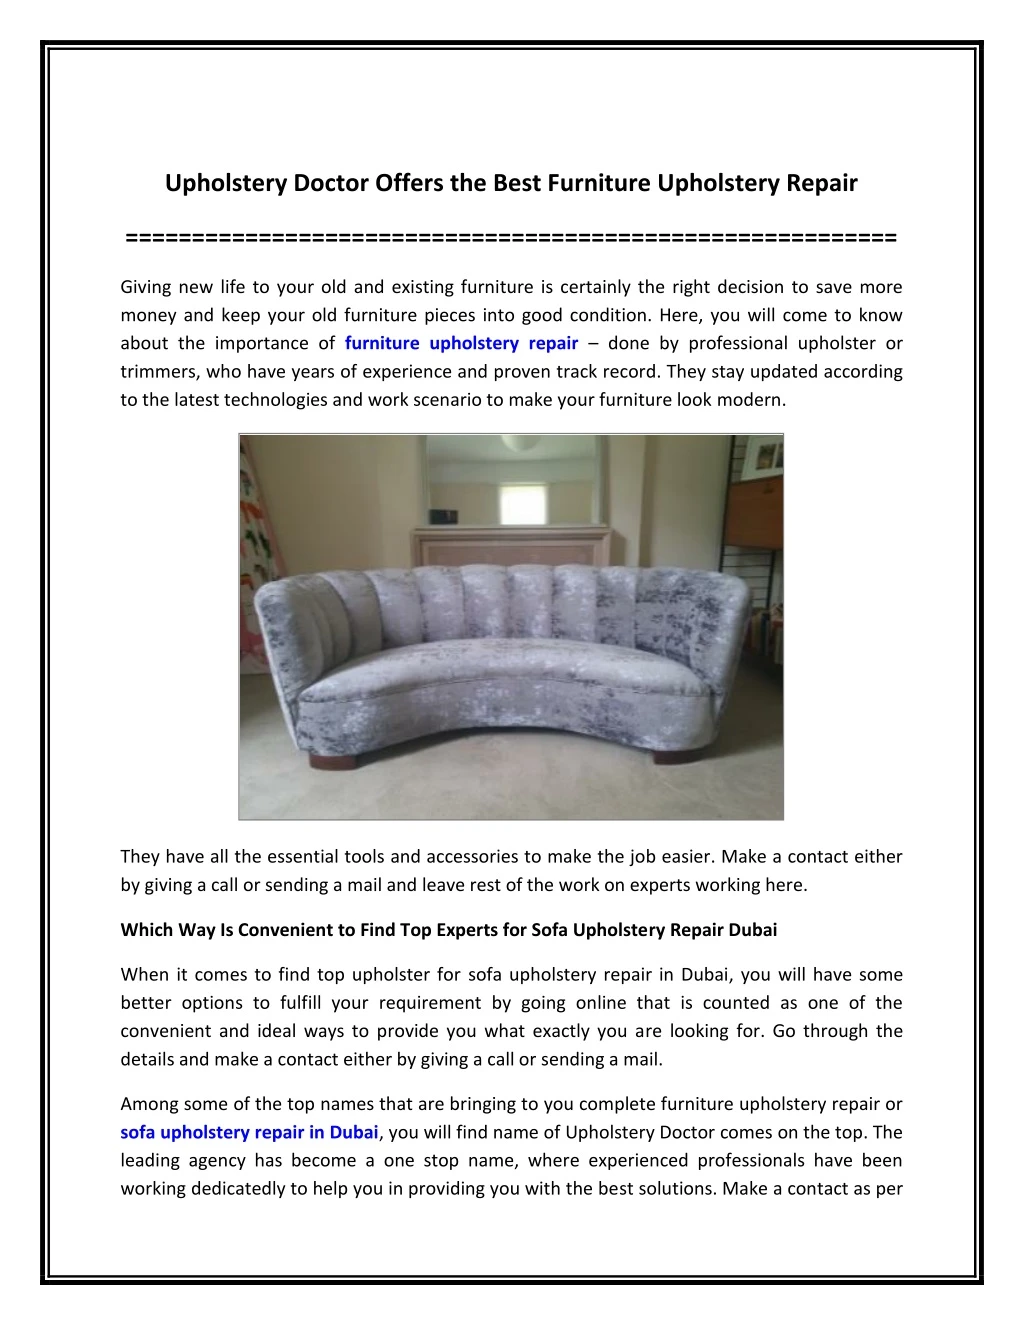 upholstery doctor offers the best furniture